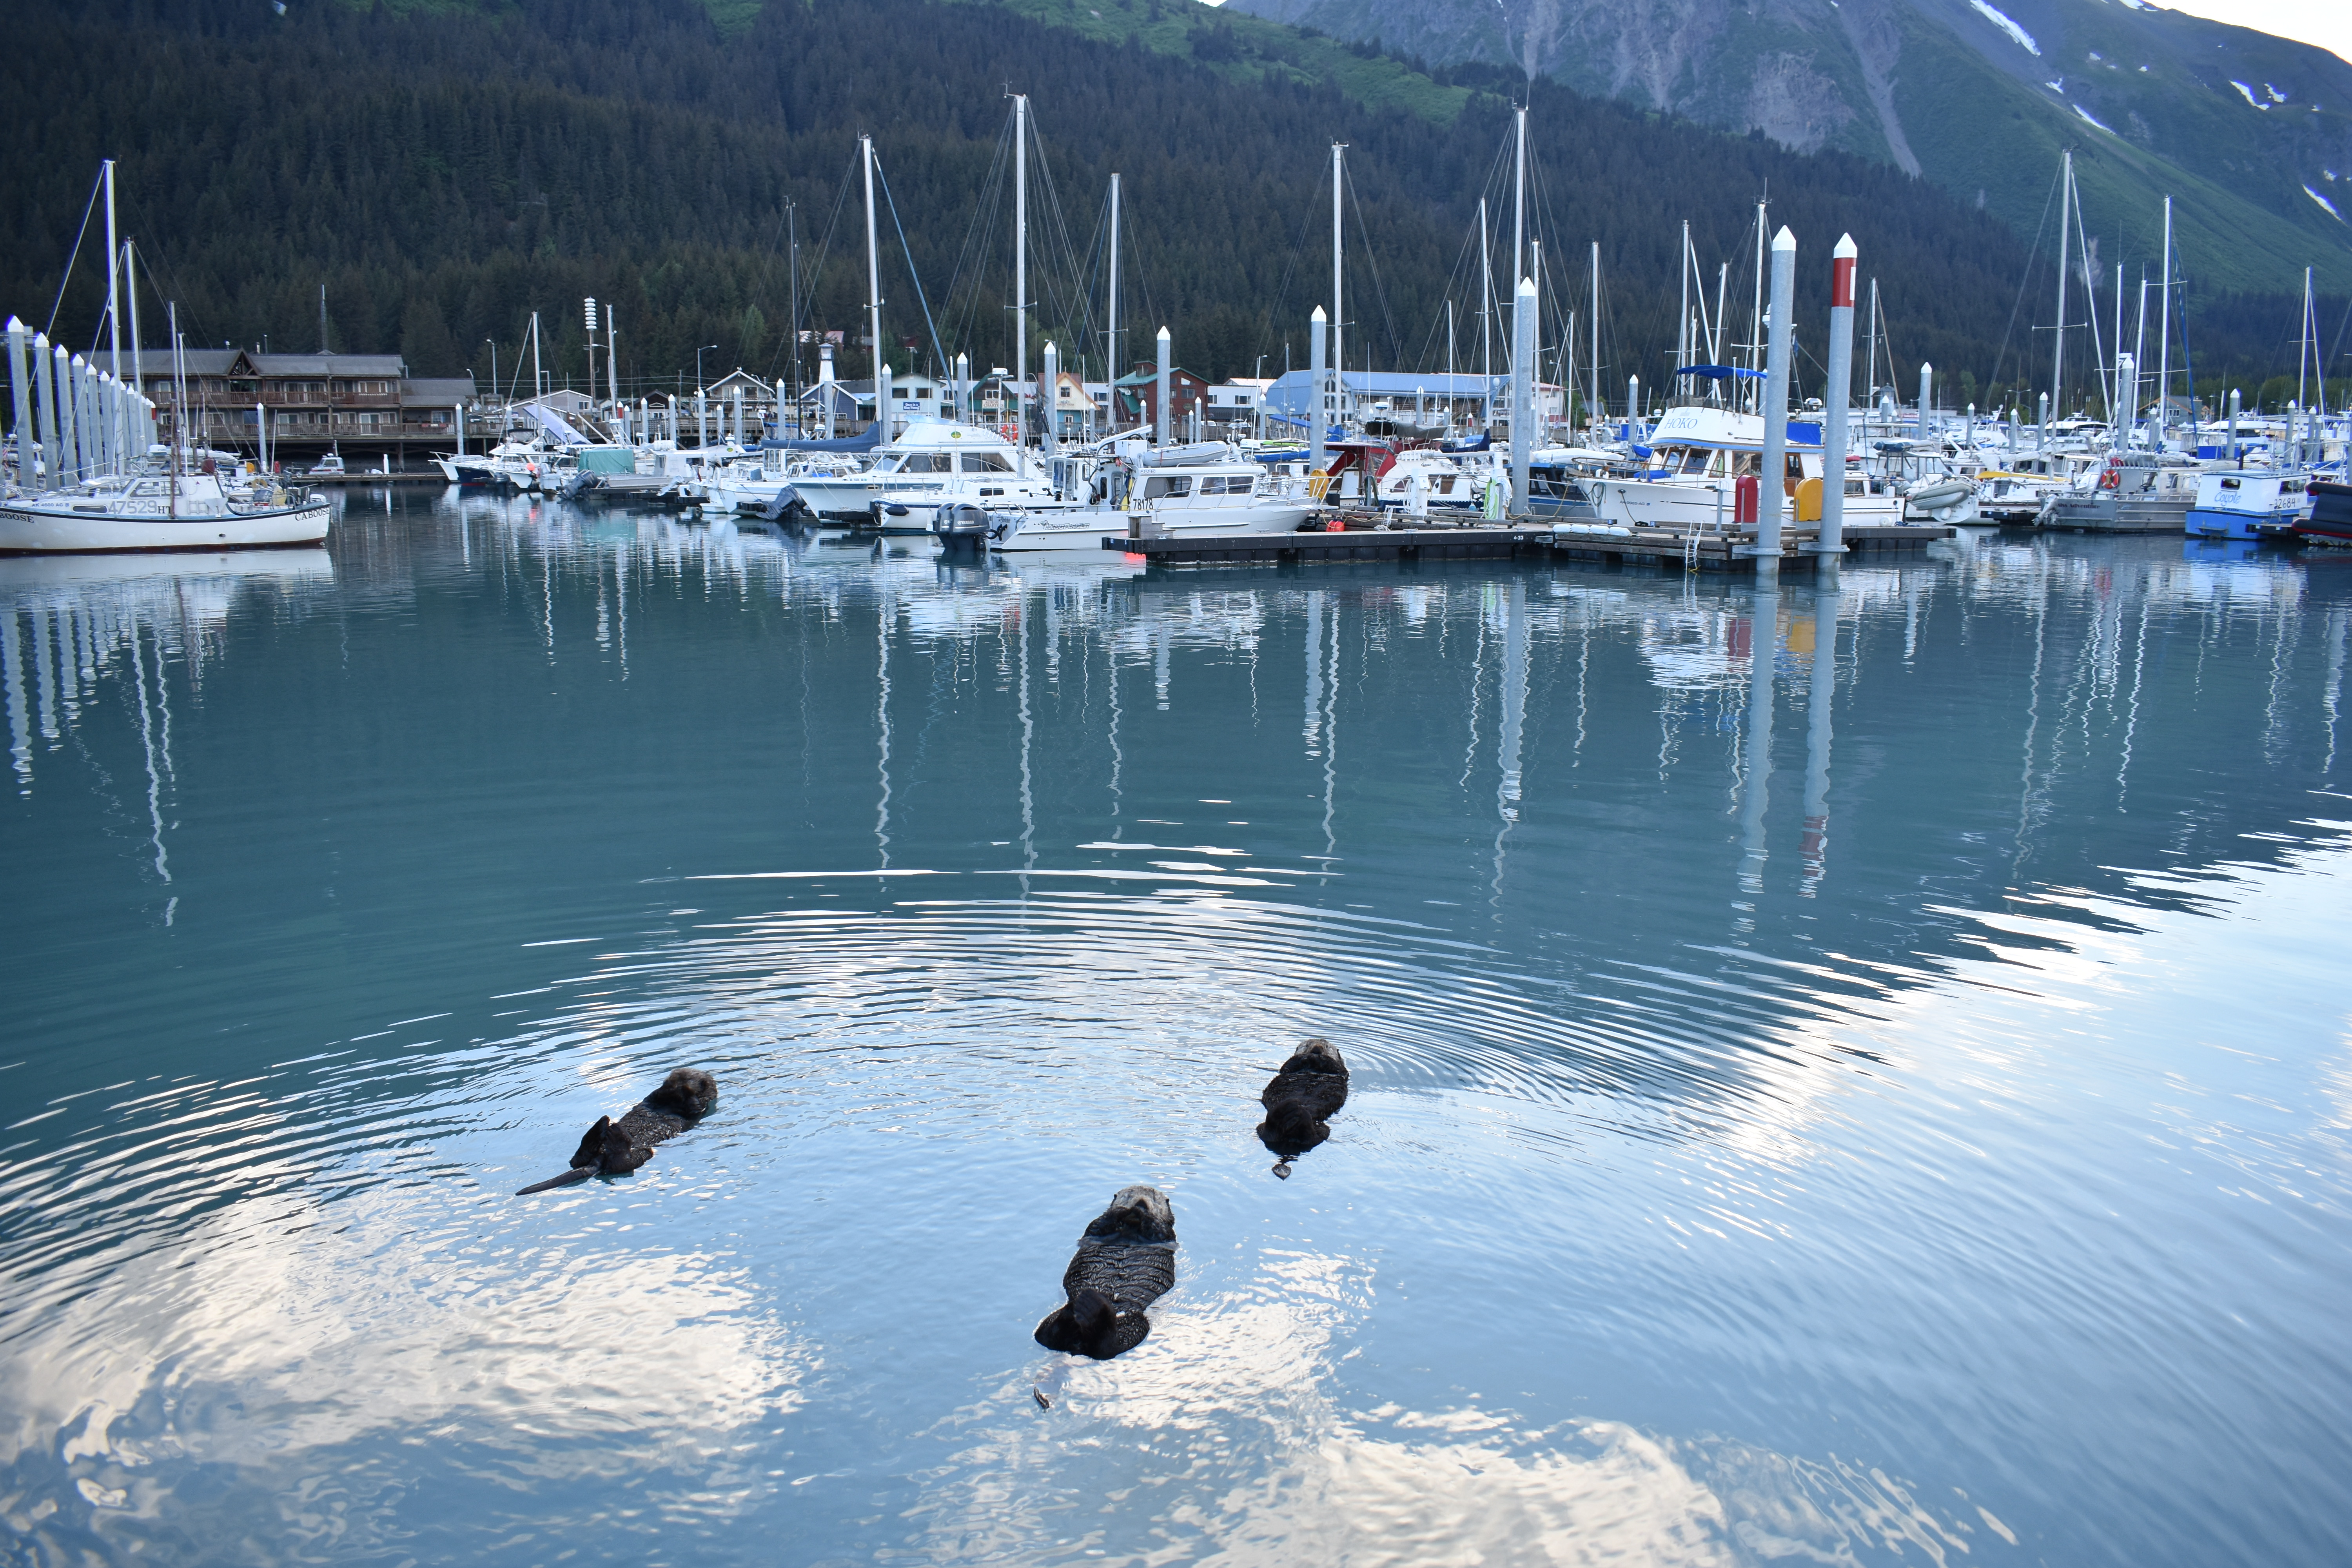 Blaire’s class took a boat trip out of Seward, Alaska, where they saw bald eagles, puffins, whales, sea otters, sea lions and seals.